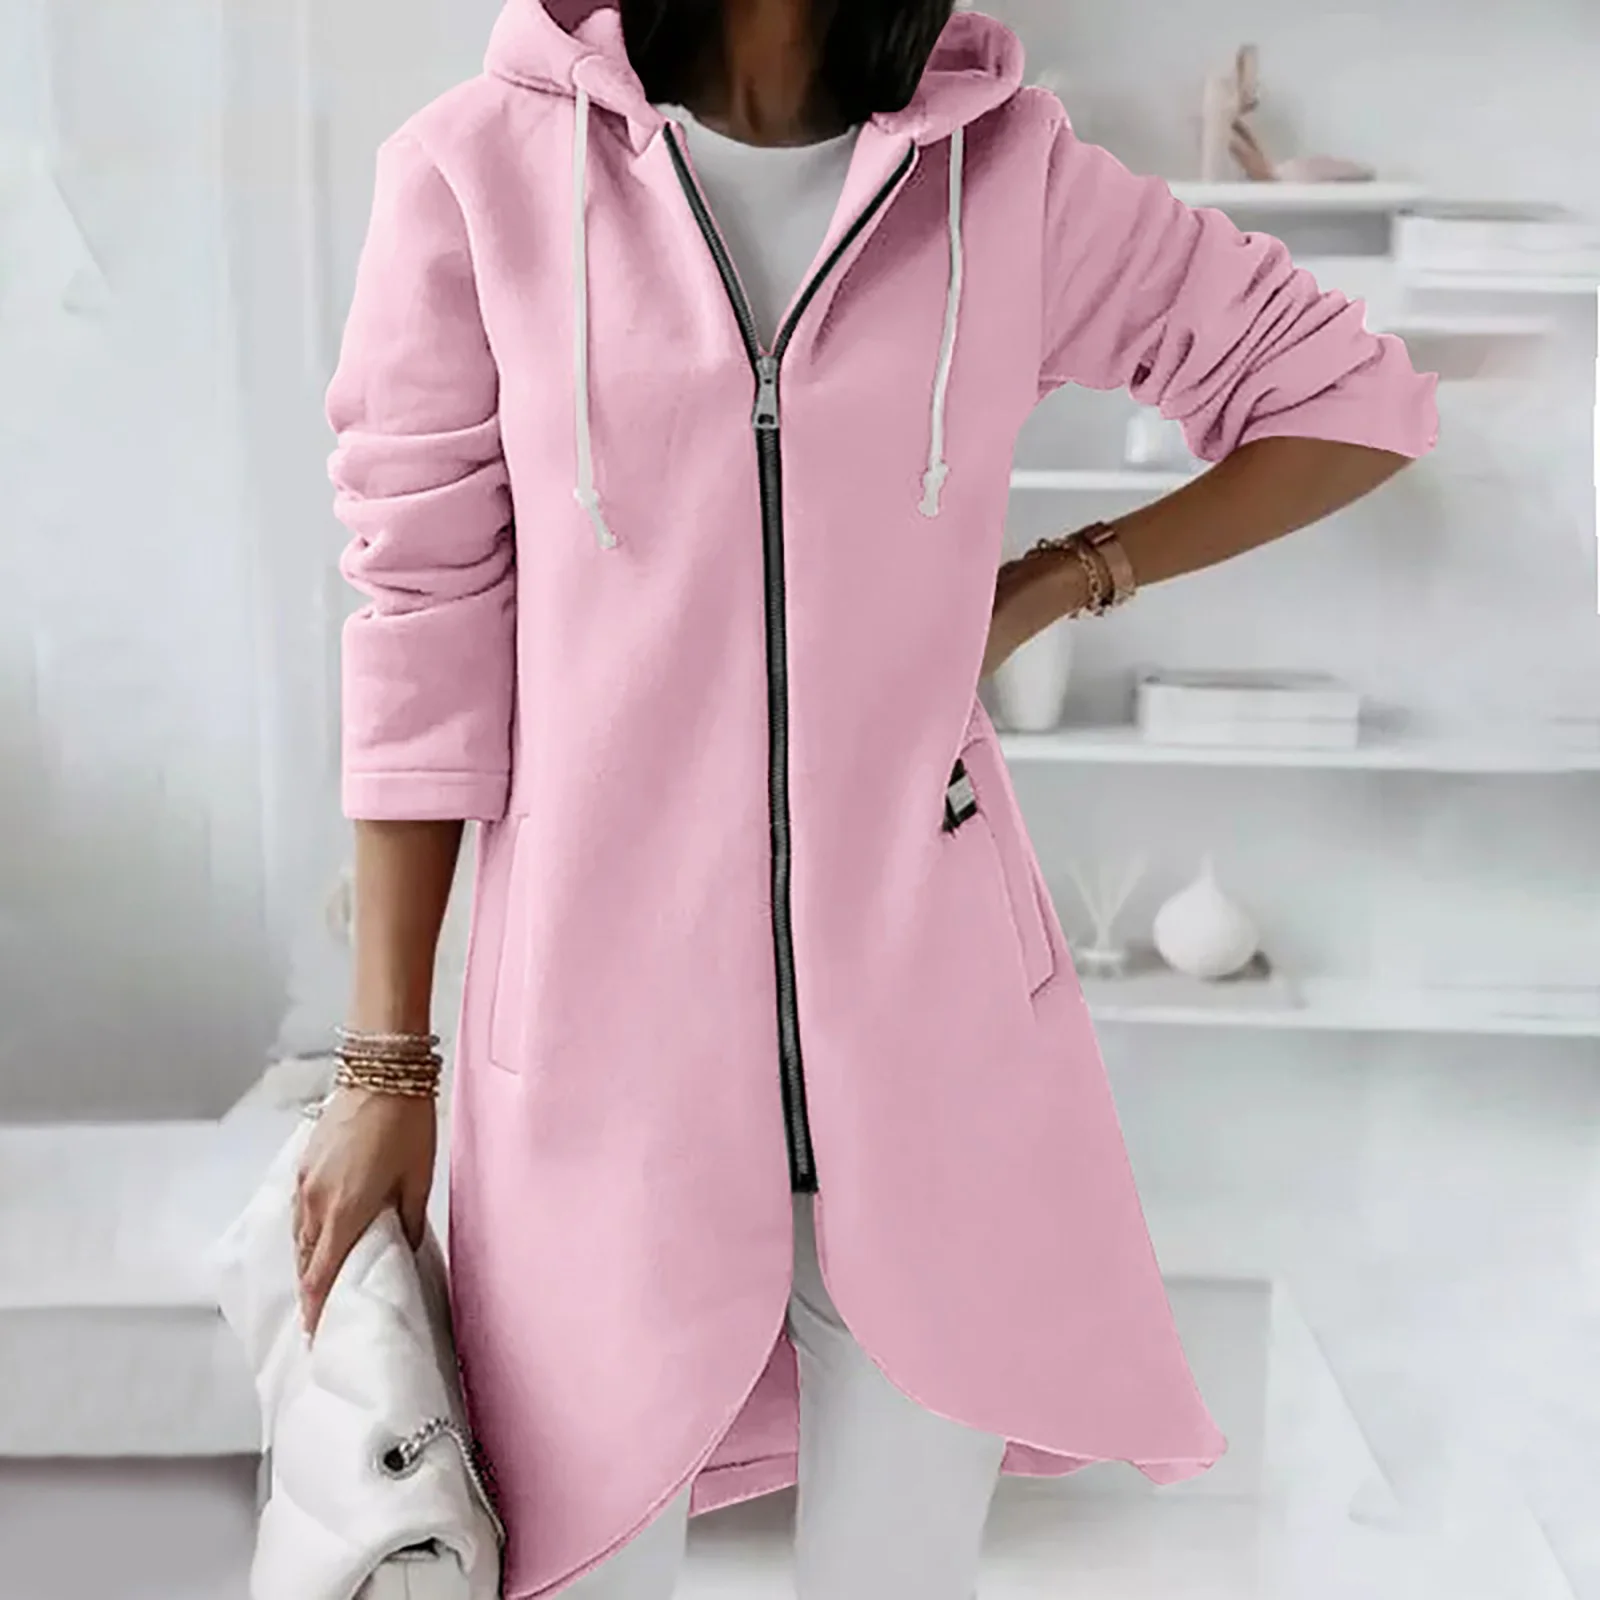 

Women's Long Tunic Hooded Sweatshirt Zip Up Jacket Available in Different Colors and Sizes Perfect for Casual Wear